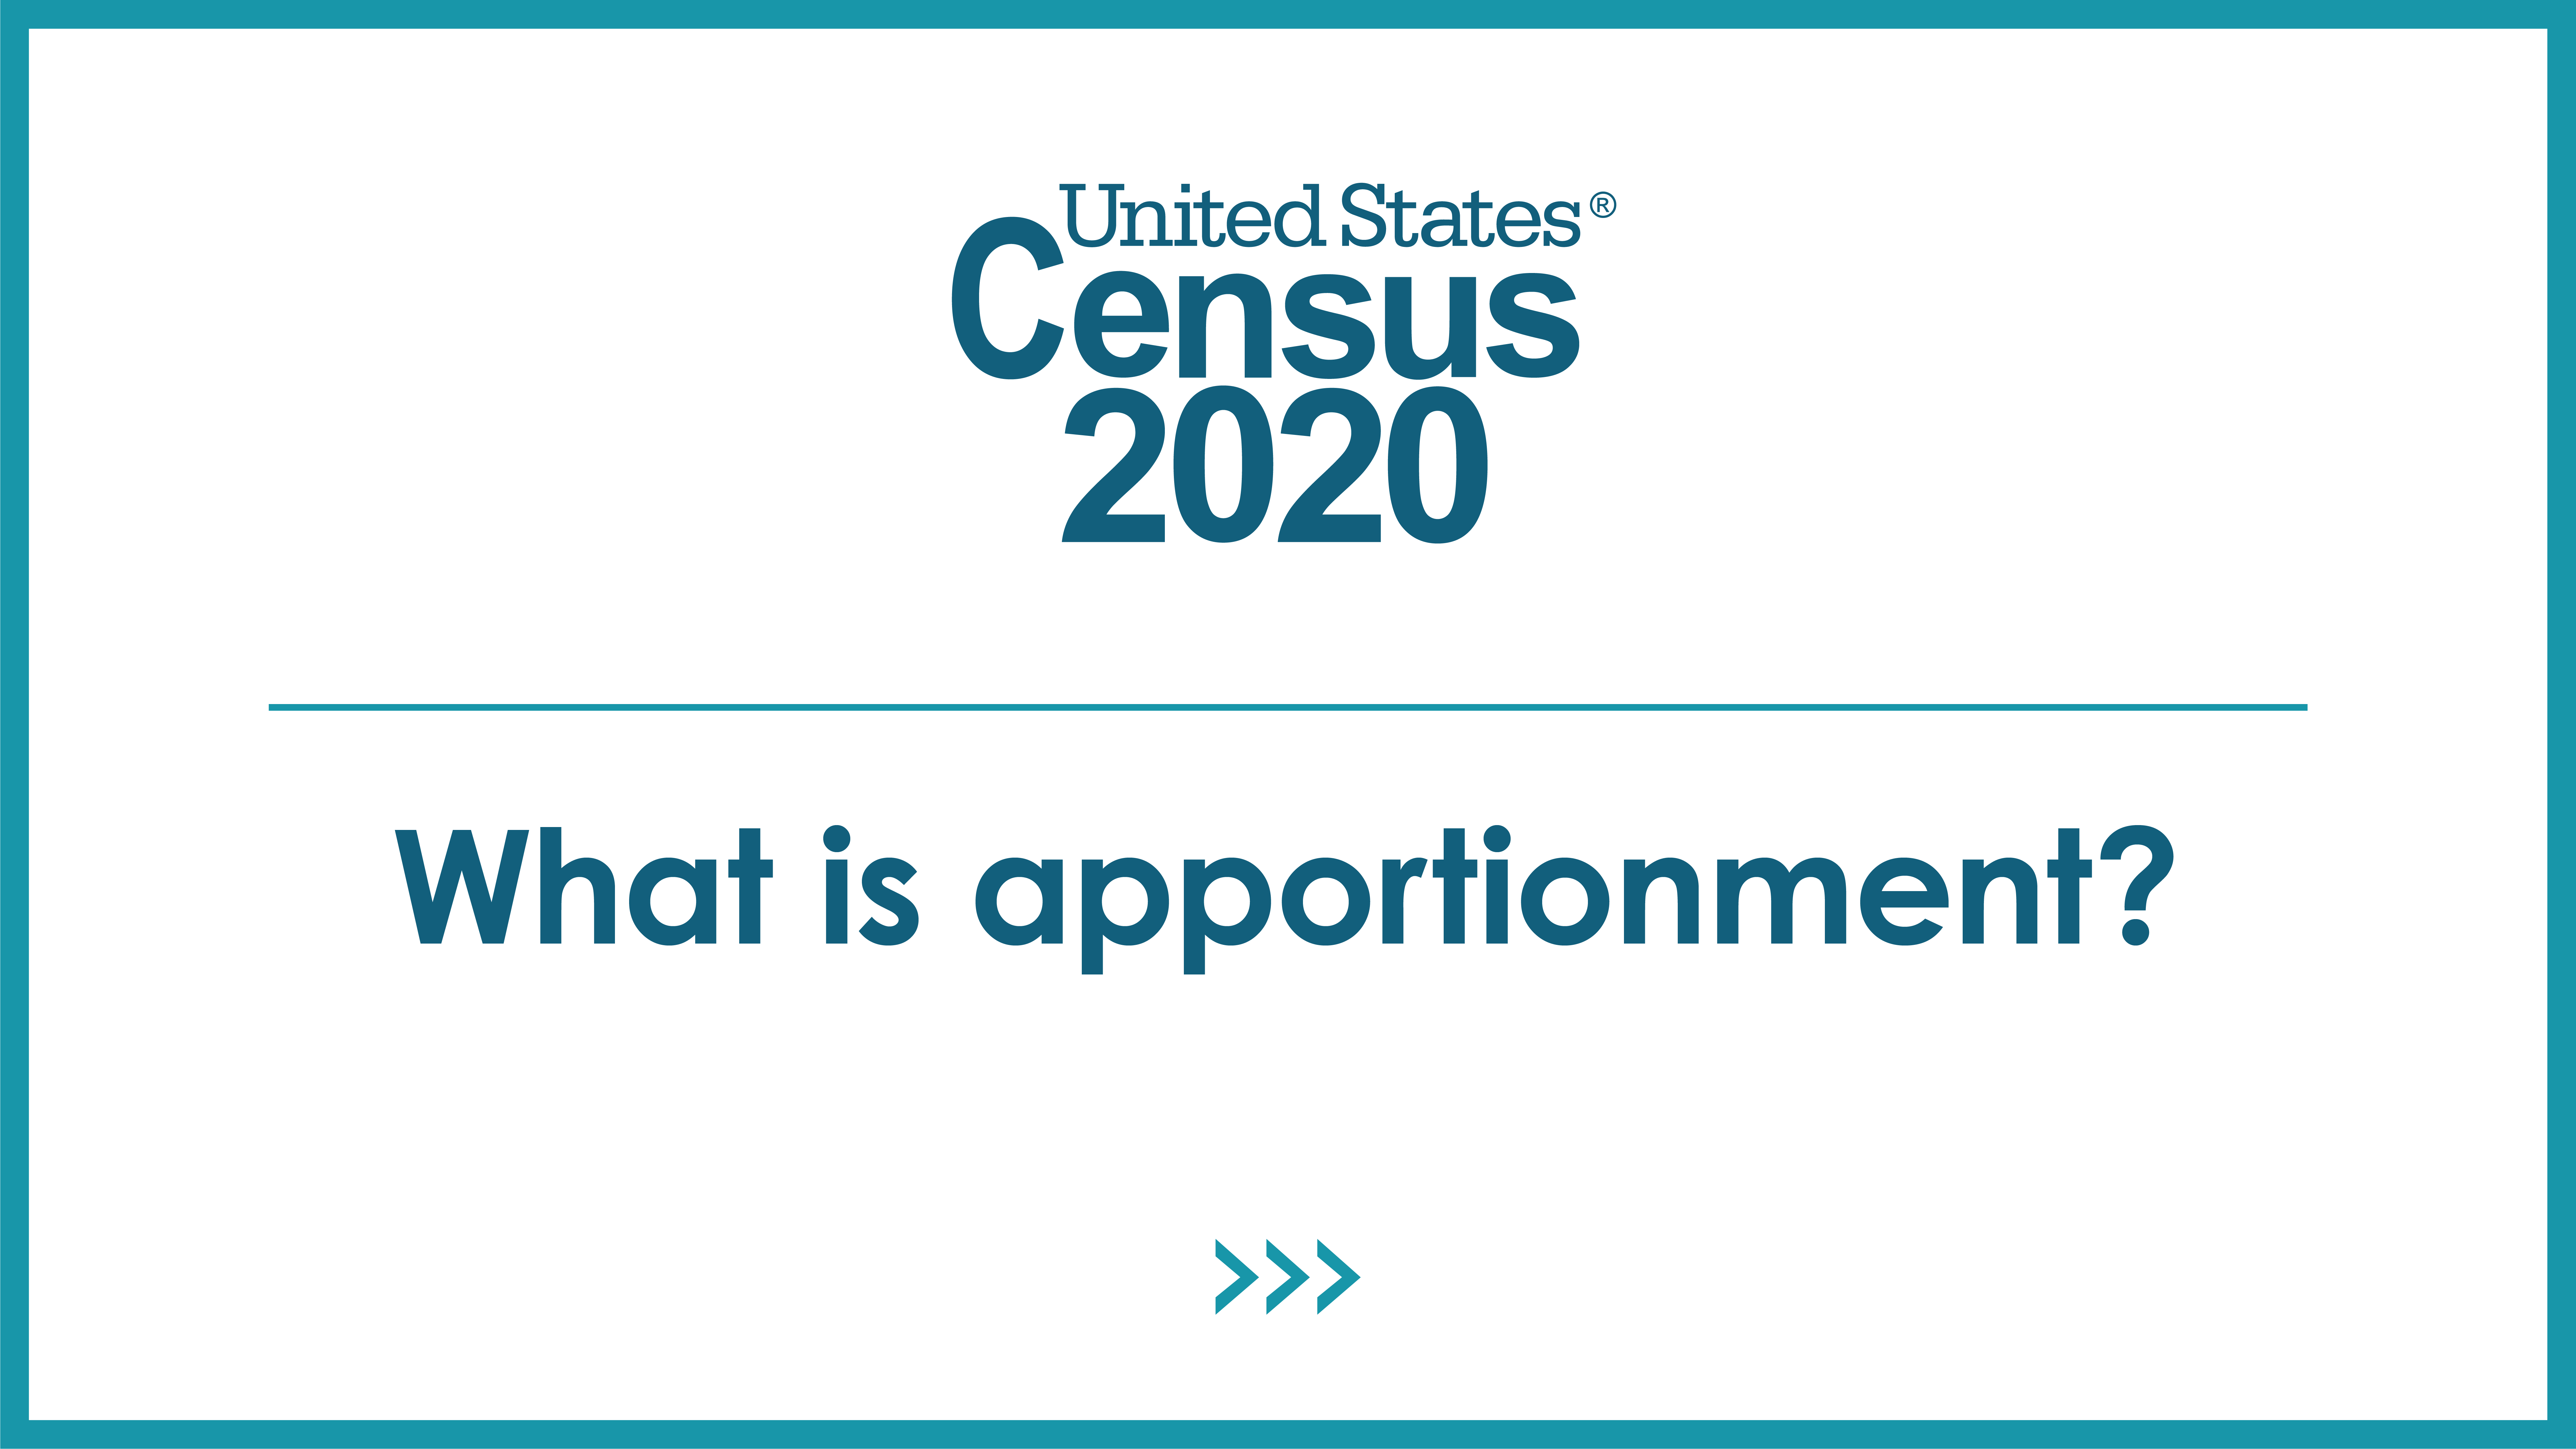 Slide with words 'United States Census 2020' and 'What is apportionment?'